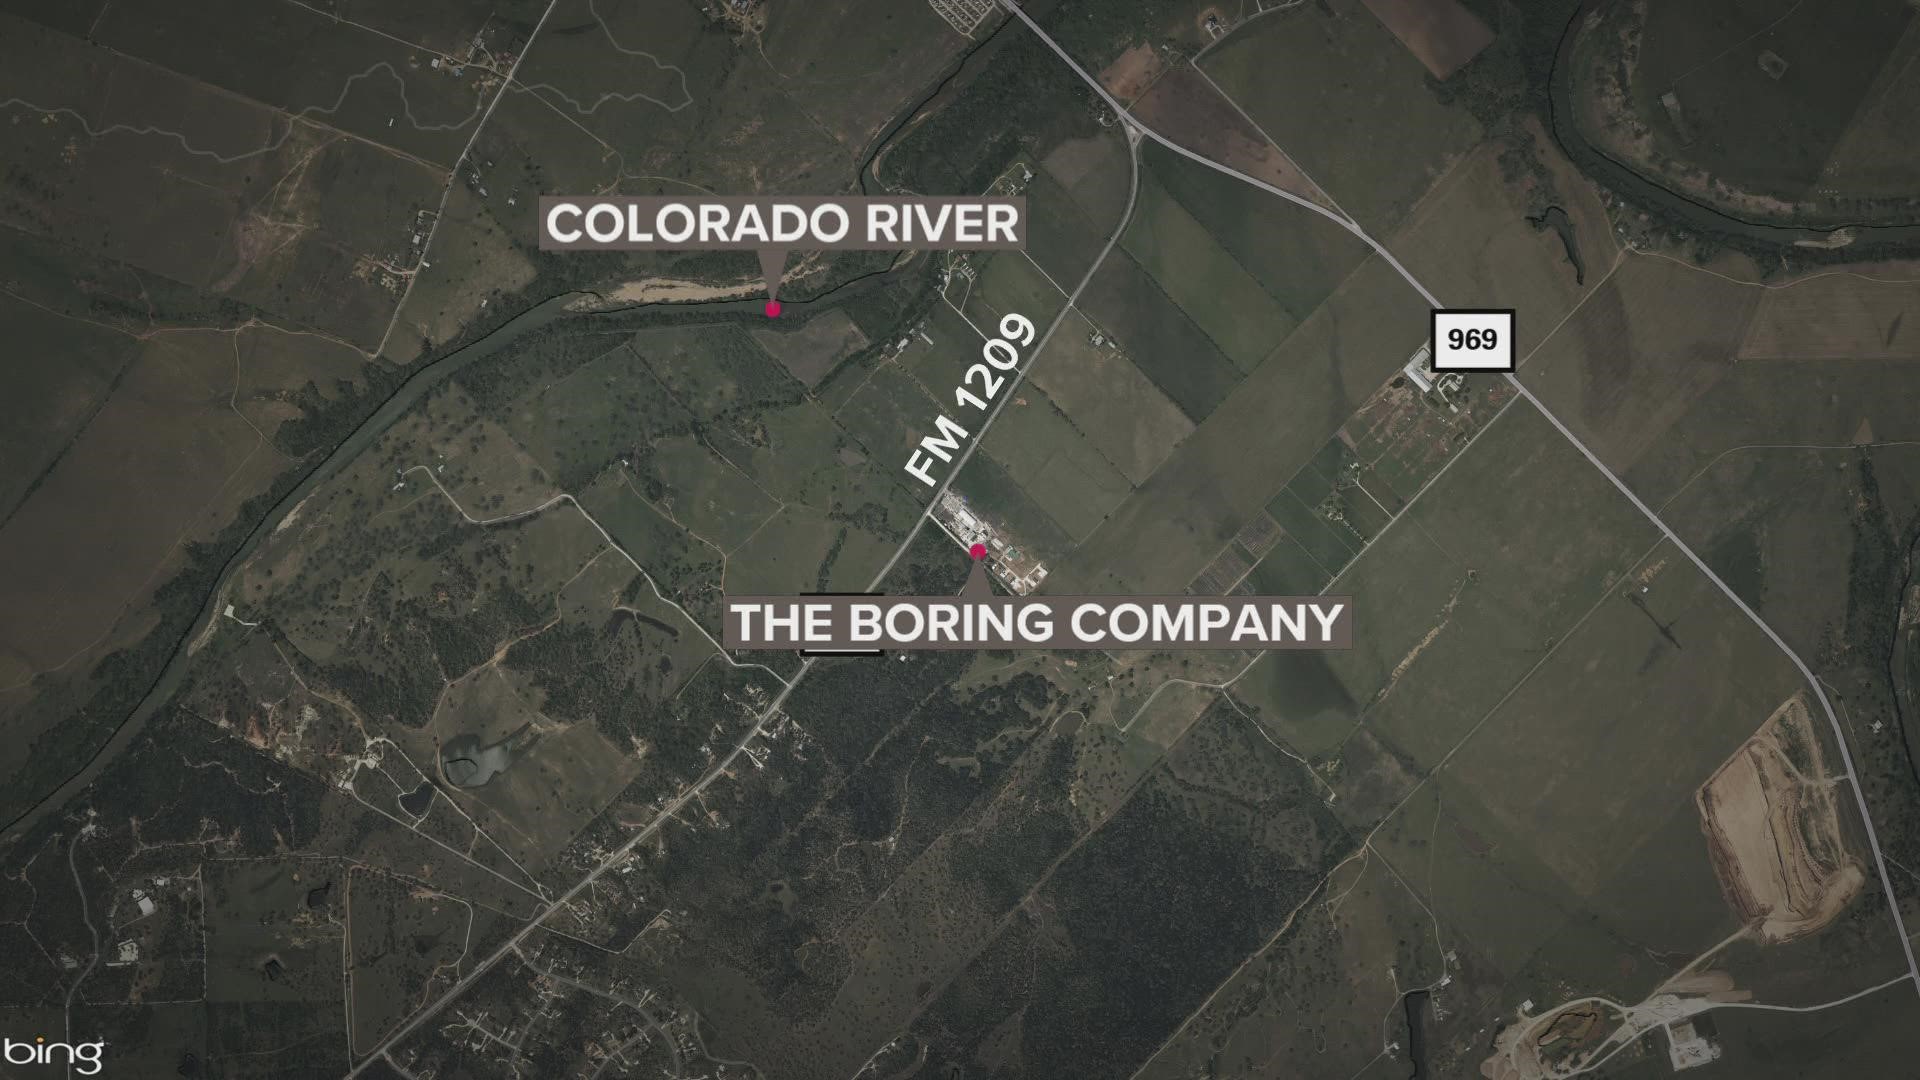 One of Elon Musk's companies wants to be able to dump thousands of gallons of treated wastewater into the Colorado River in Bastrop County.